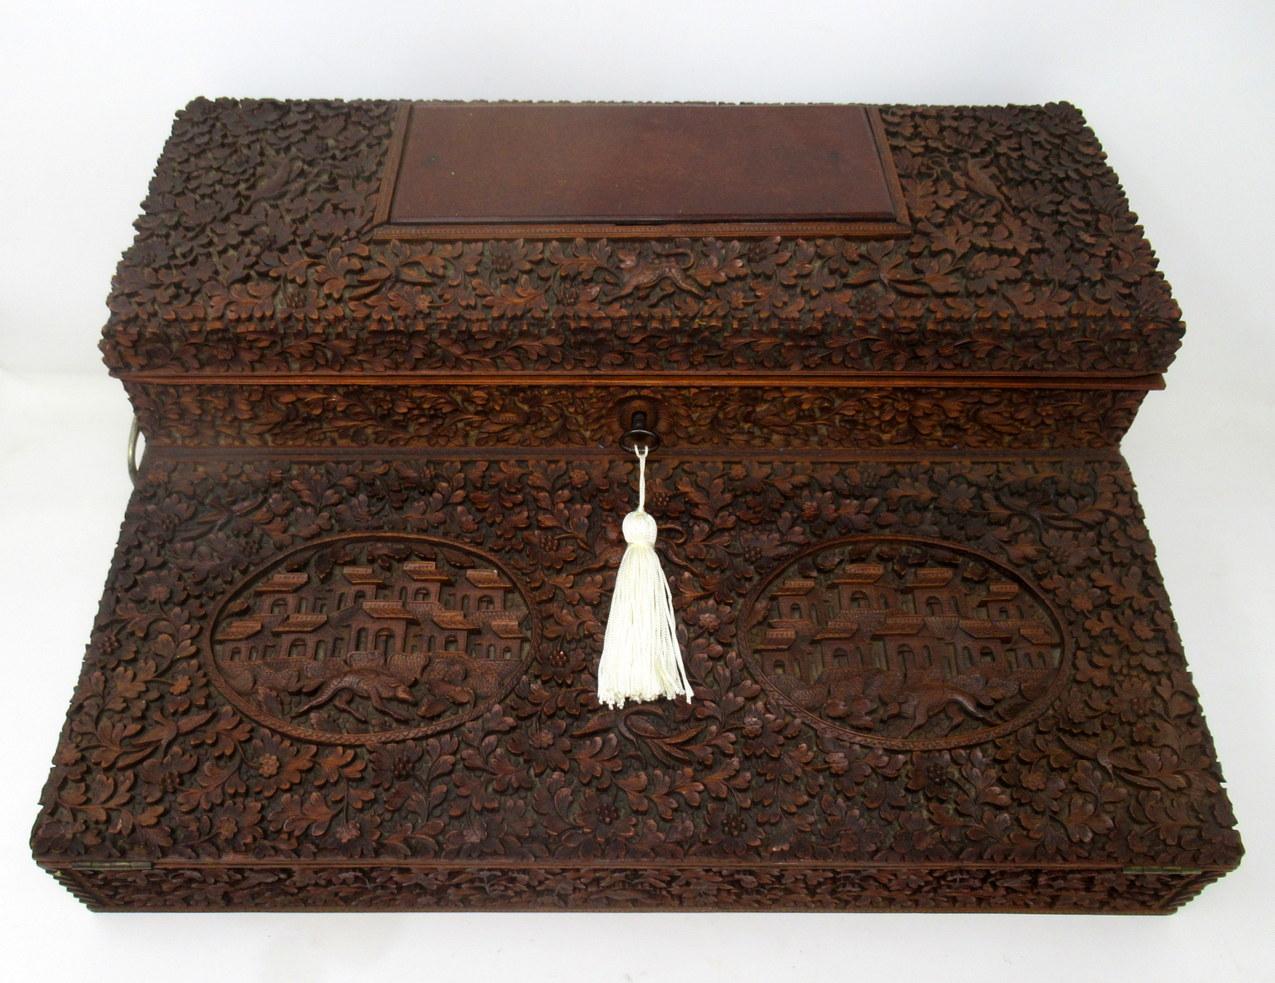 Stunning Anglo-Indian Bombay hand carved sandalwood writing slope of generous proportions and outstanding quality, mid-19th century.

The exterior hand carved profusely with animals and birds amongst scrolling foliage, the upper dome shaped